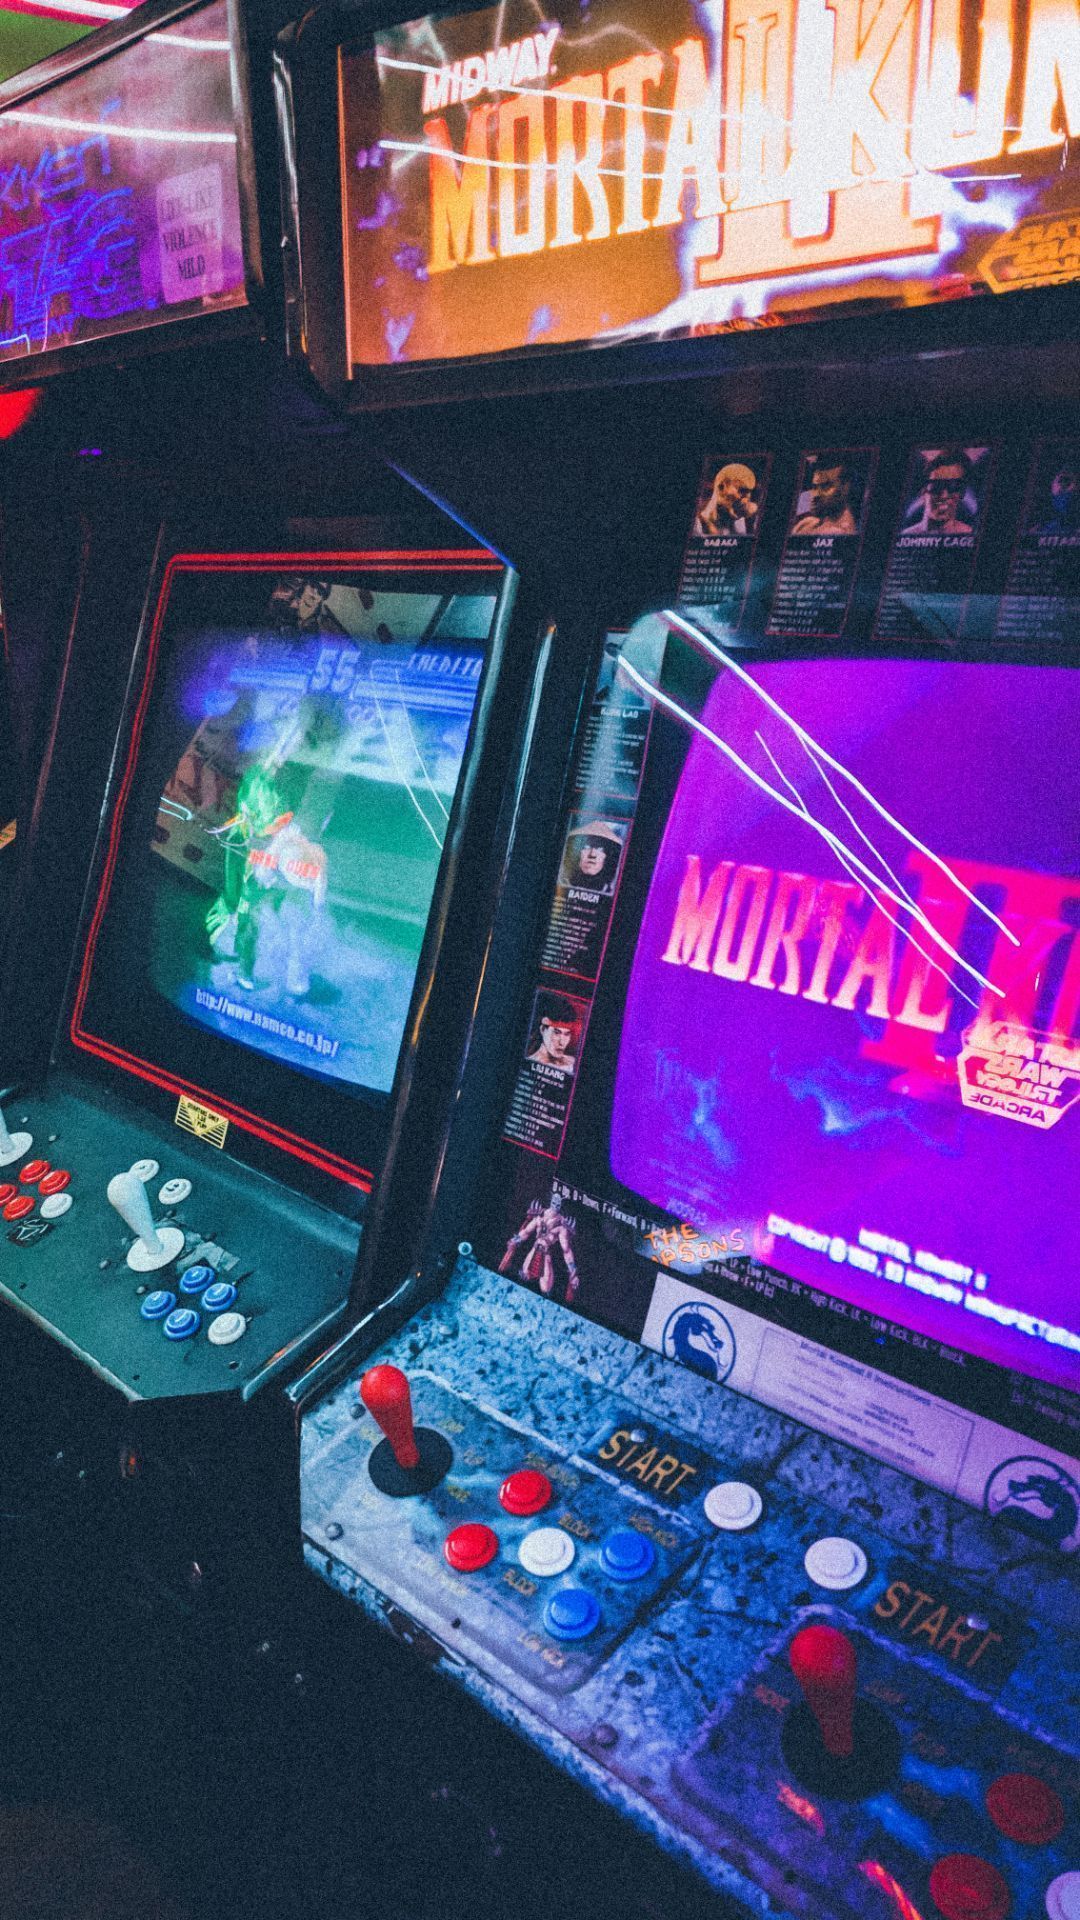 A group of arcade games in an old fashioned game room - Synthwave